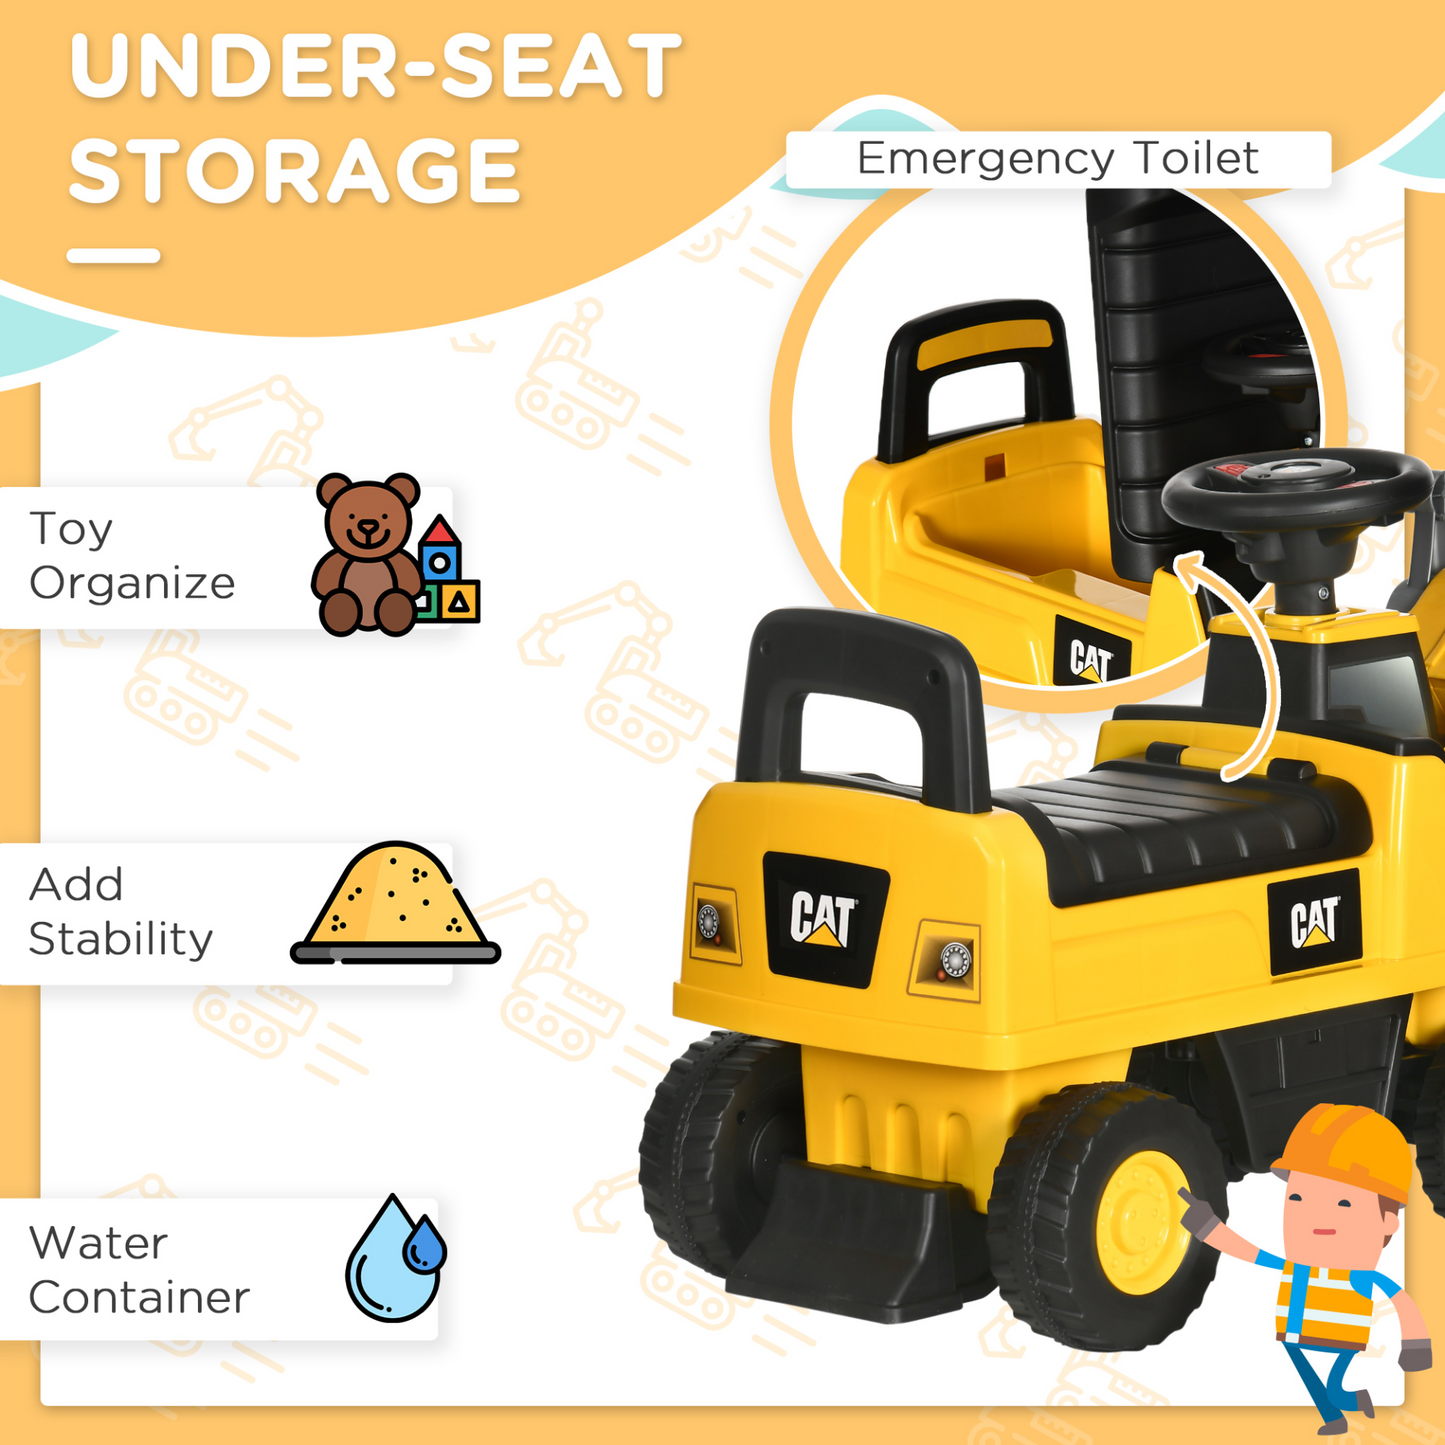 CAT Licensed Kids Construction Ride-On Toddler Digger Excavator Foot-To-Floor Ride-On Toy w/ Manual Shovel, Horn, Hidden Storage, for Ages 1-3 Years